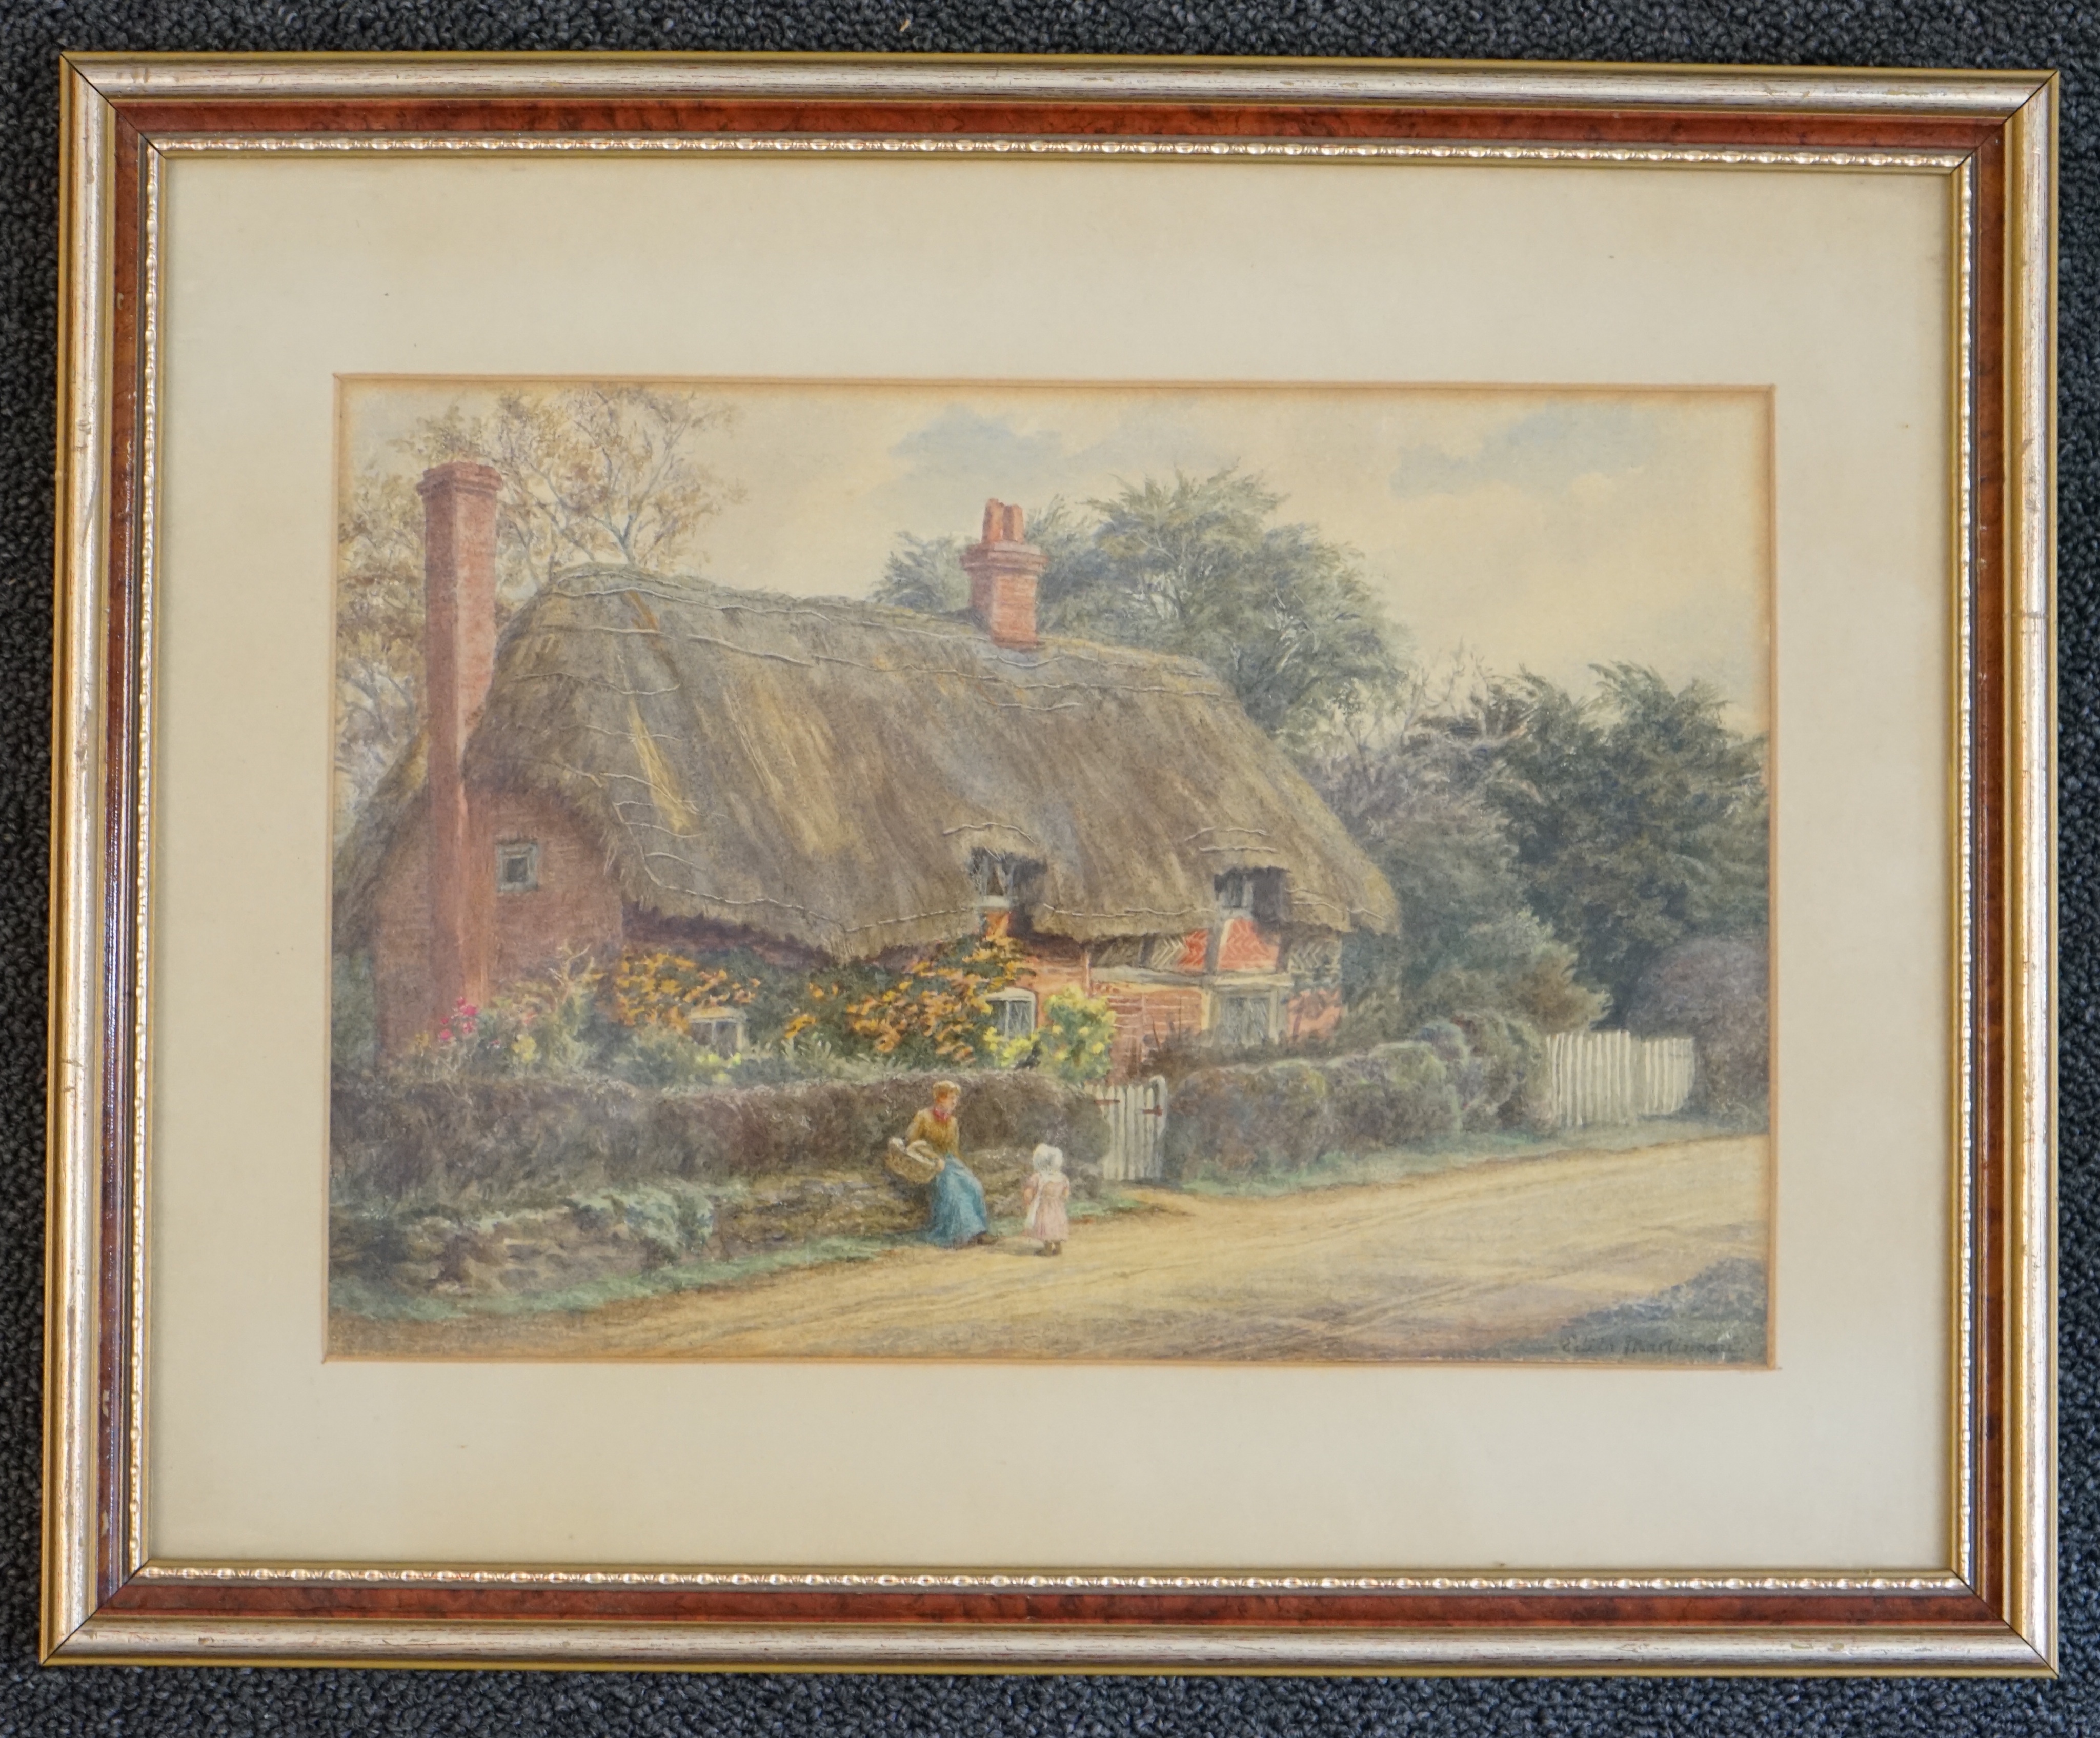 Edith Martineau (1842-1909), watercolour, Figures beside a thatched cottage, signed, 19 x 28cm